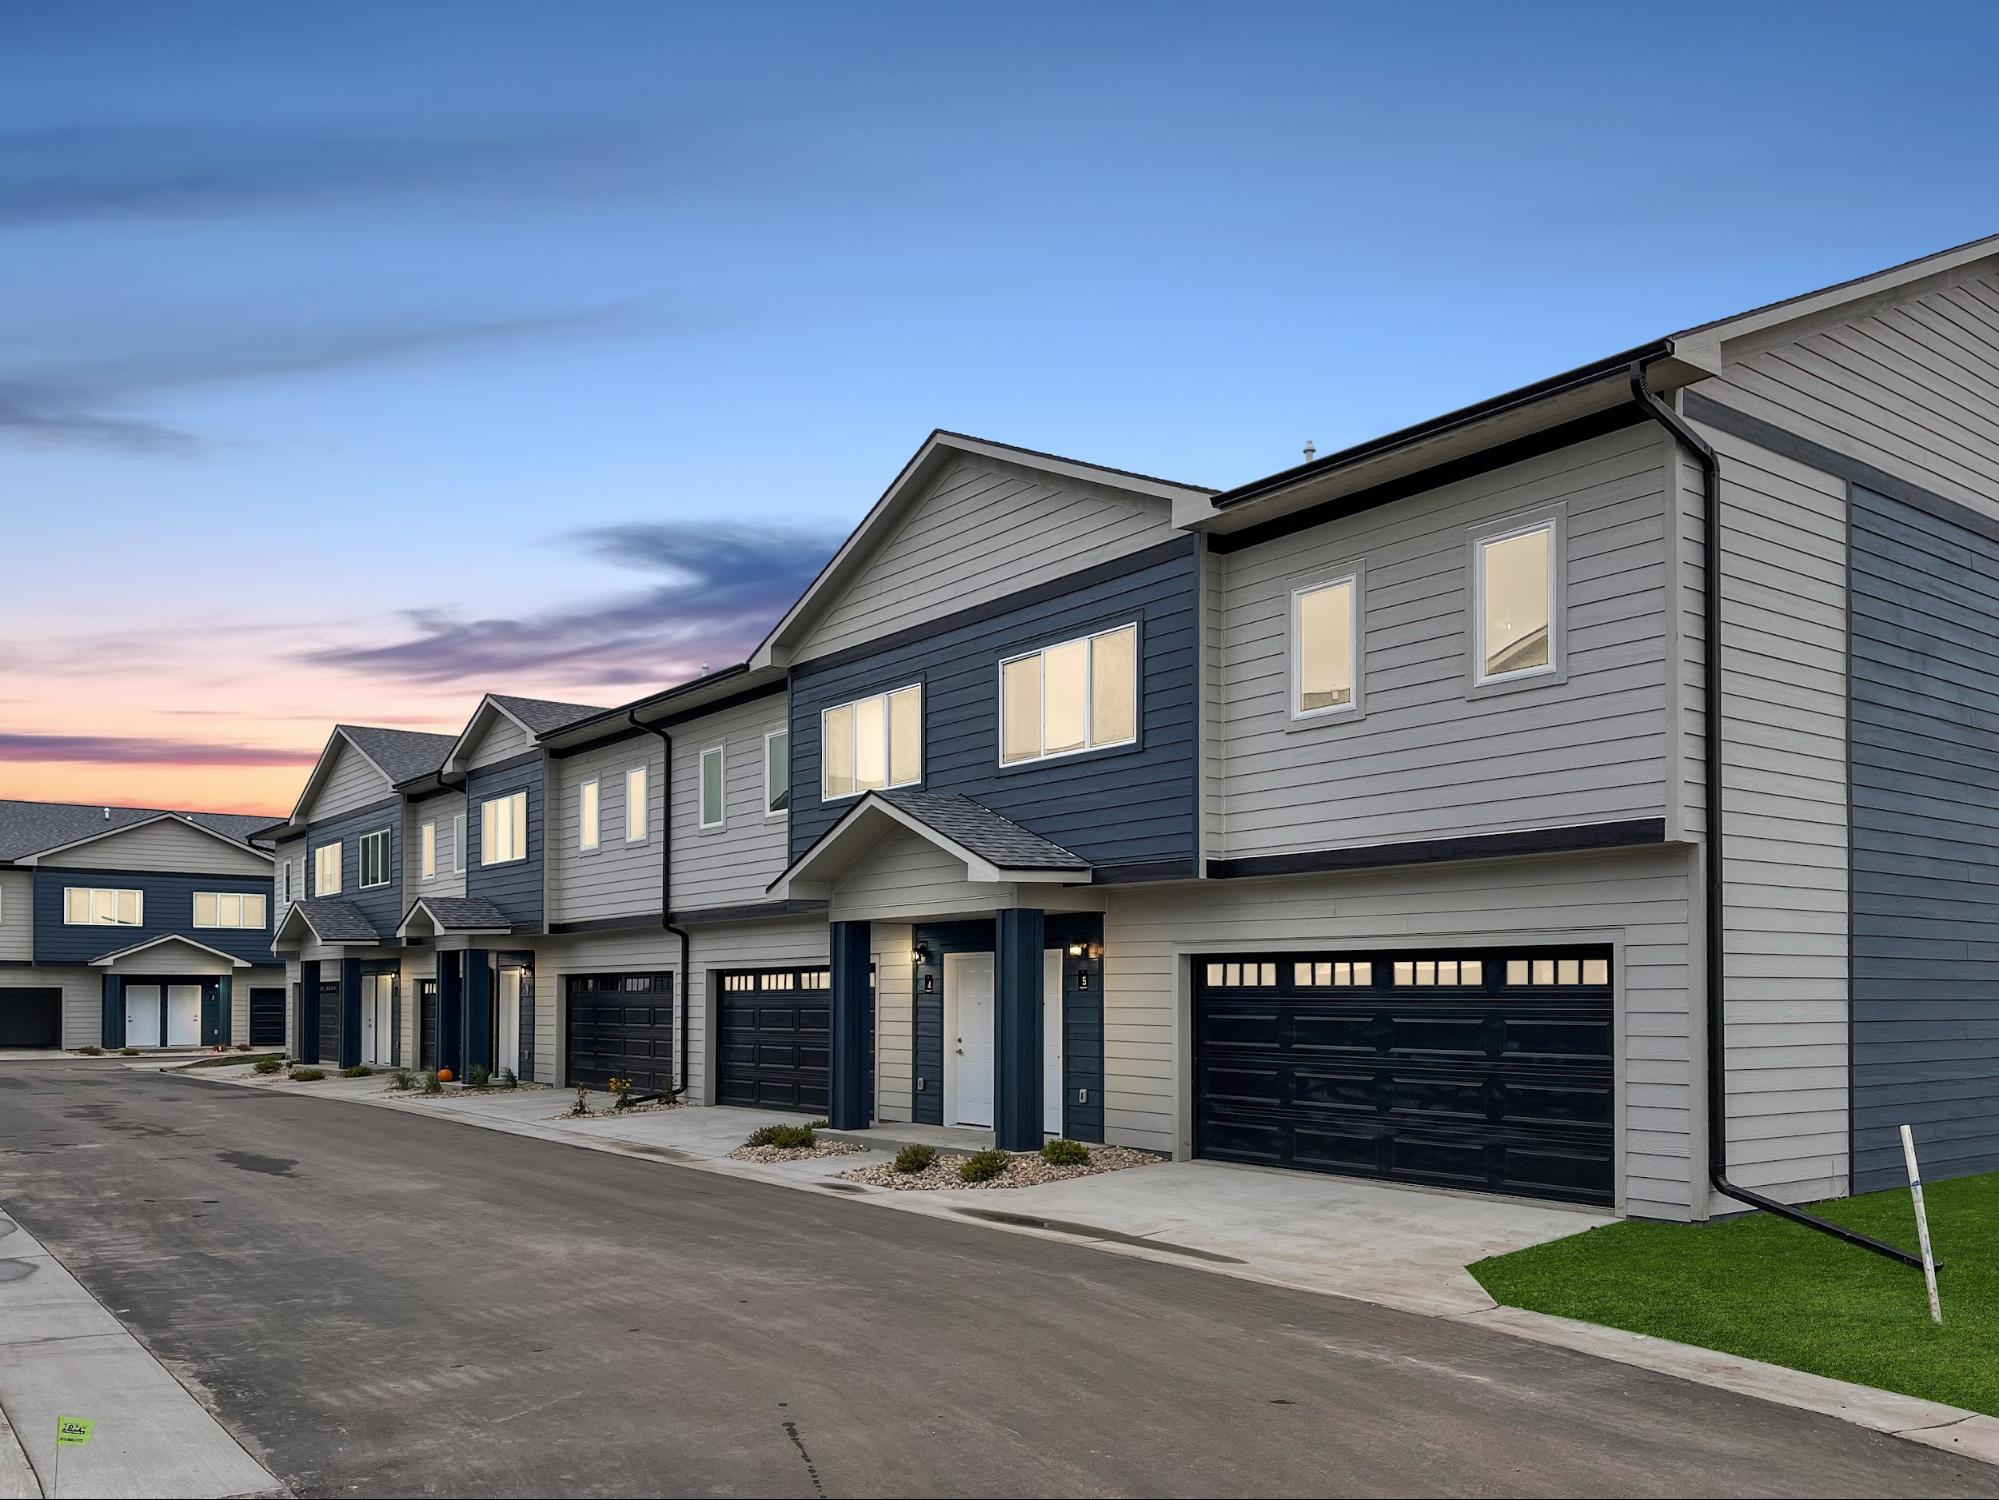 District 29 Townhomes